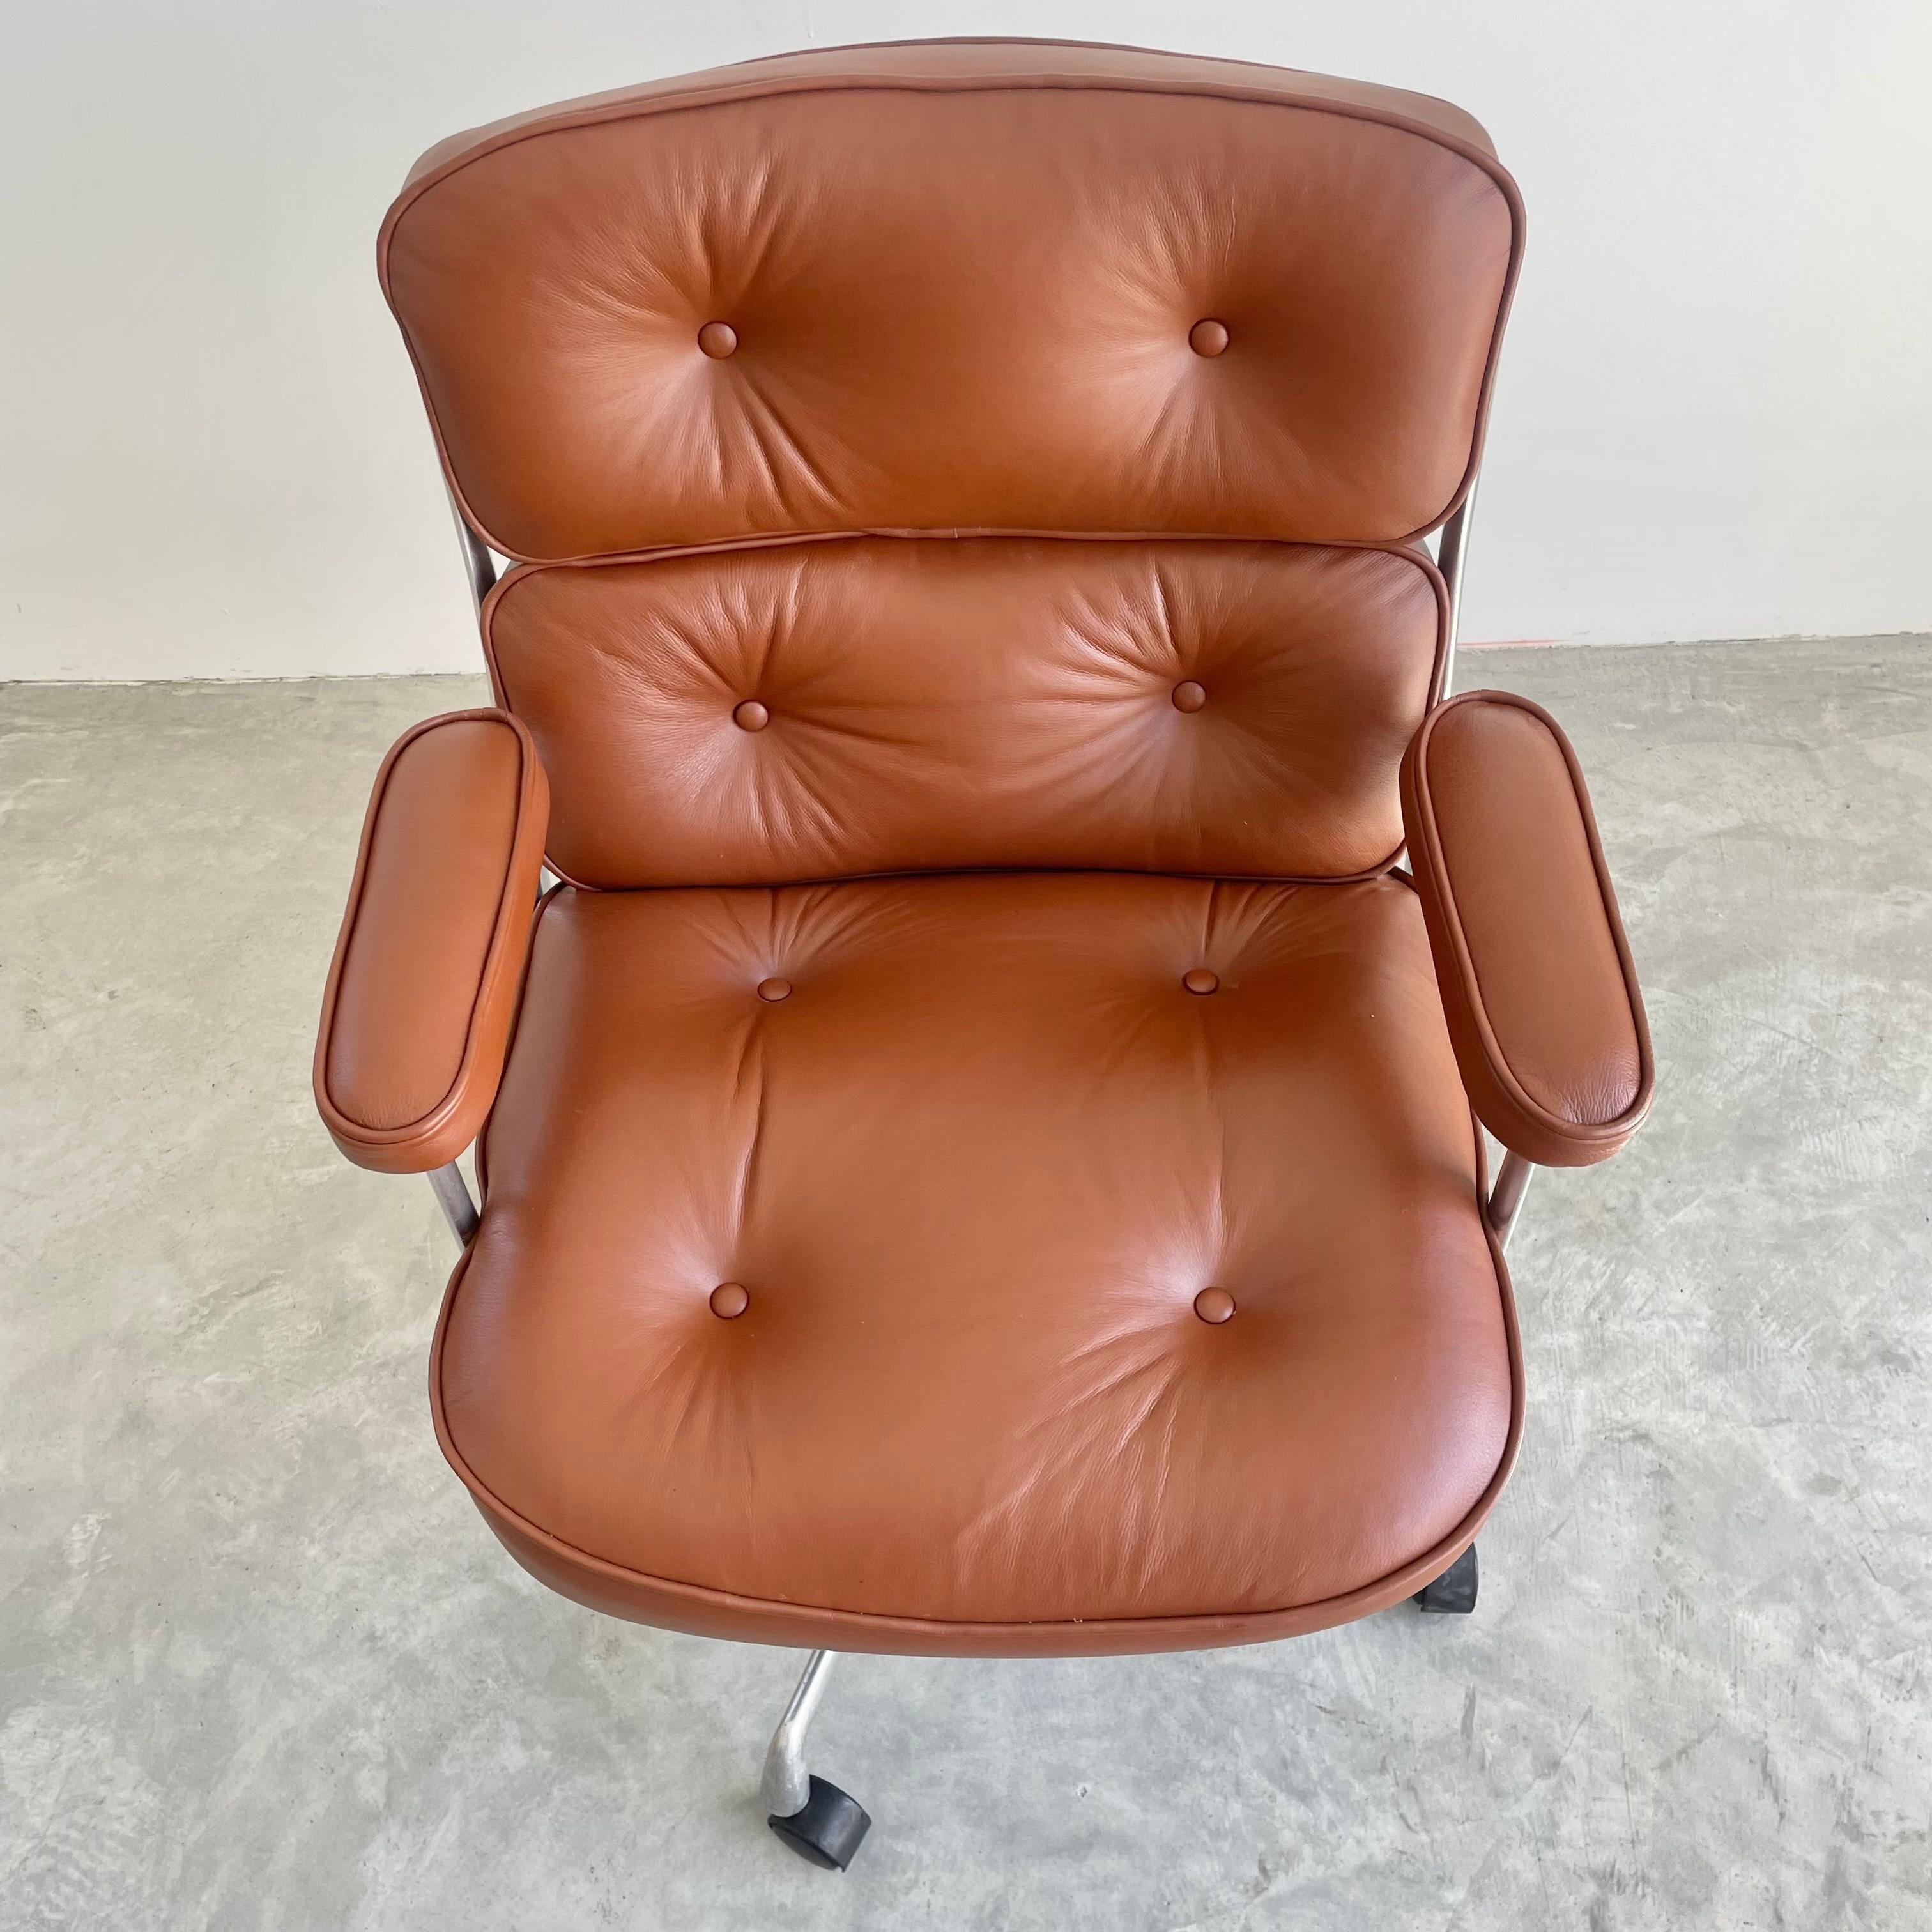 Eames Time Life Chair in Brown Leather for Herman Miller, 1984 USA For Sale 7